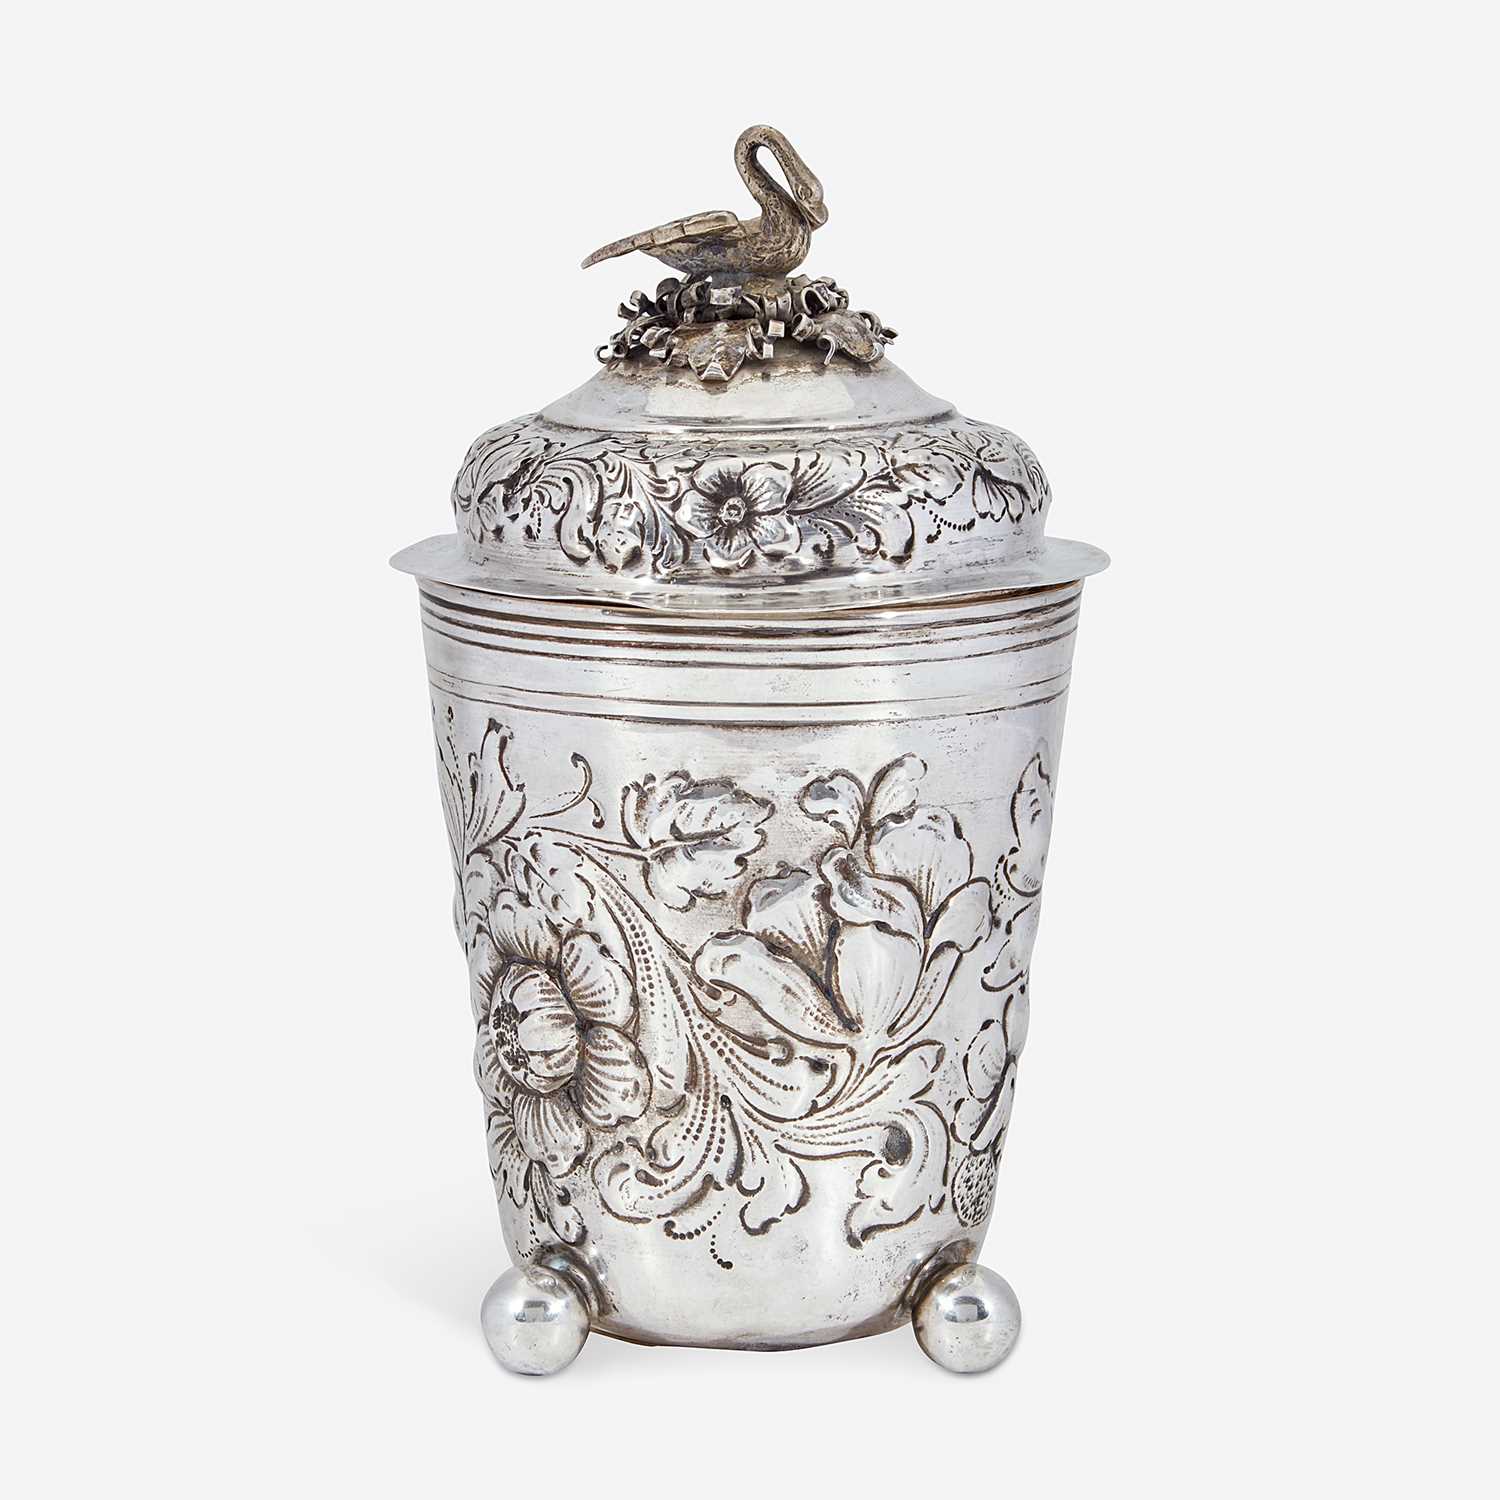 Lot 184 - A German Baroque Silver Covered Cup